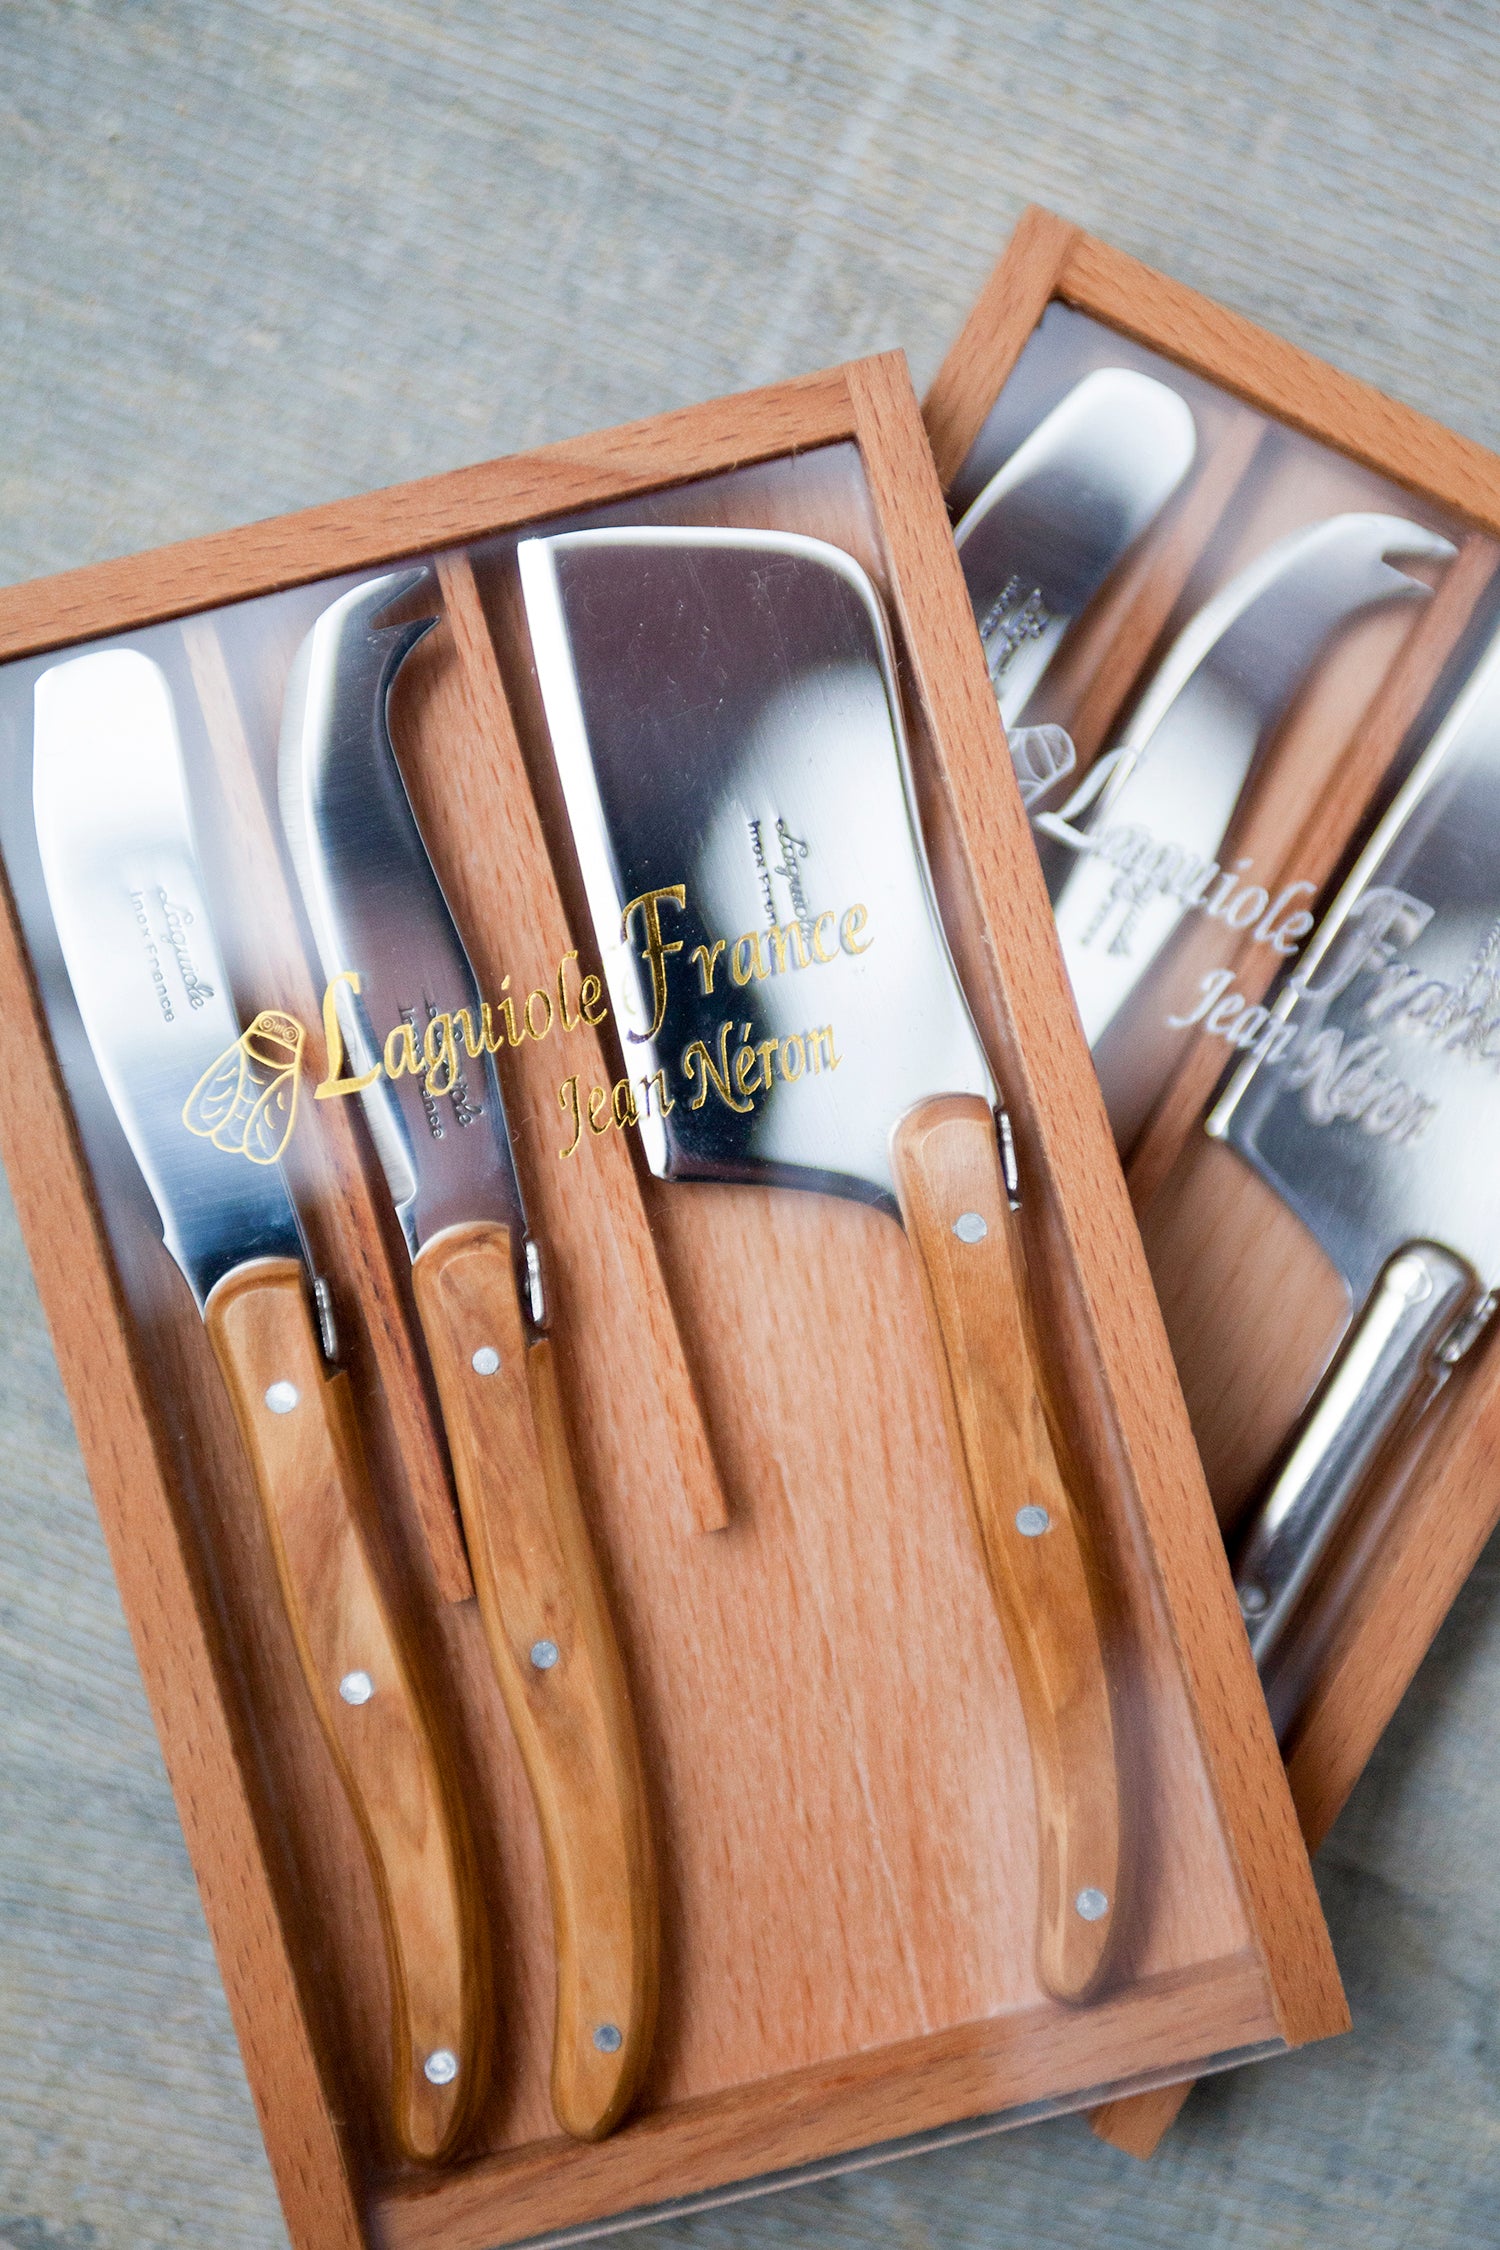 Laguiole Mini Olivewood Cheese Set in Wooden Box with Acrylic Lid (Set of 3) Cutlery Set Laguiole Brand_Laguiole Cheese Sets Gift Sets Kitchen_Dinnerware Kitchen_Kitchenware Laguiole Loose Mini Rainbow Utensils Mini Cheese Sets LookBook_0166_1